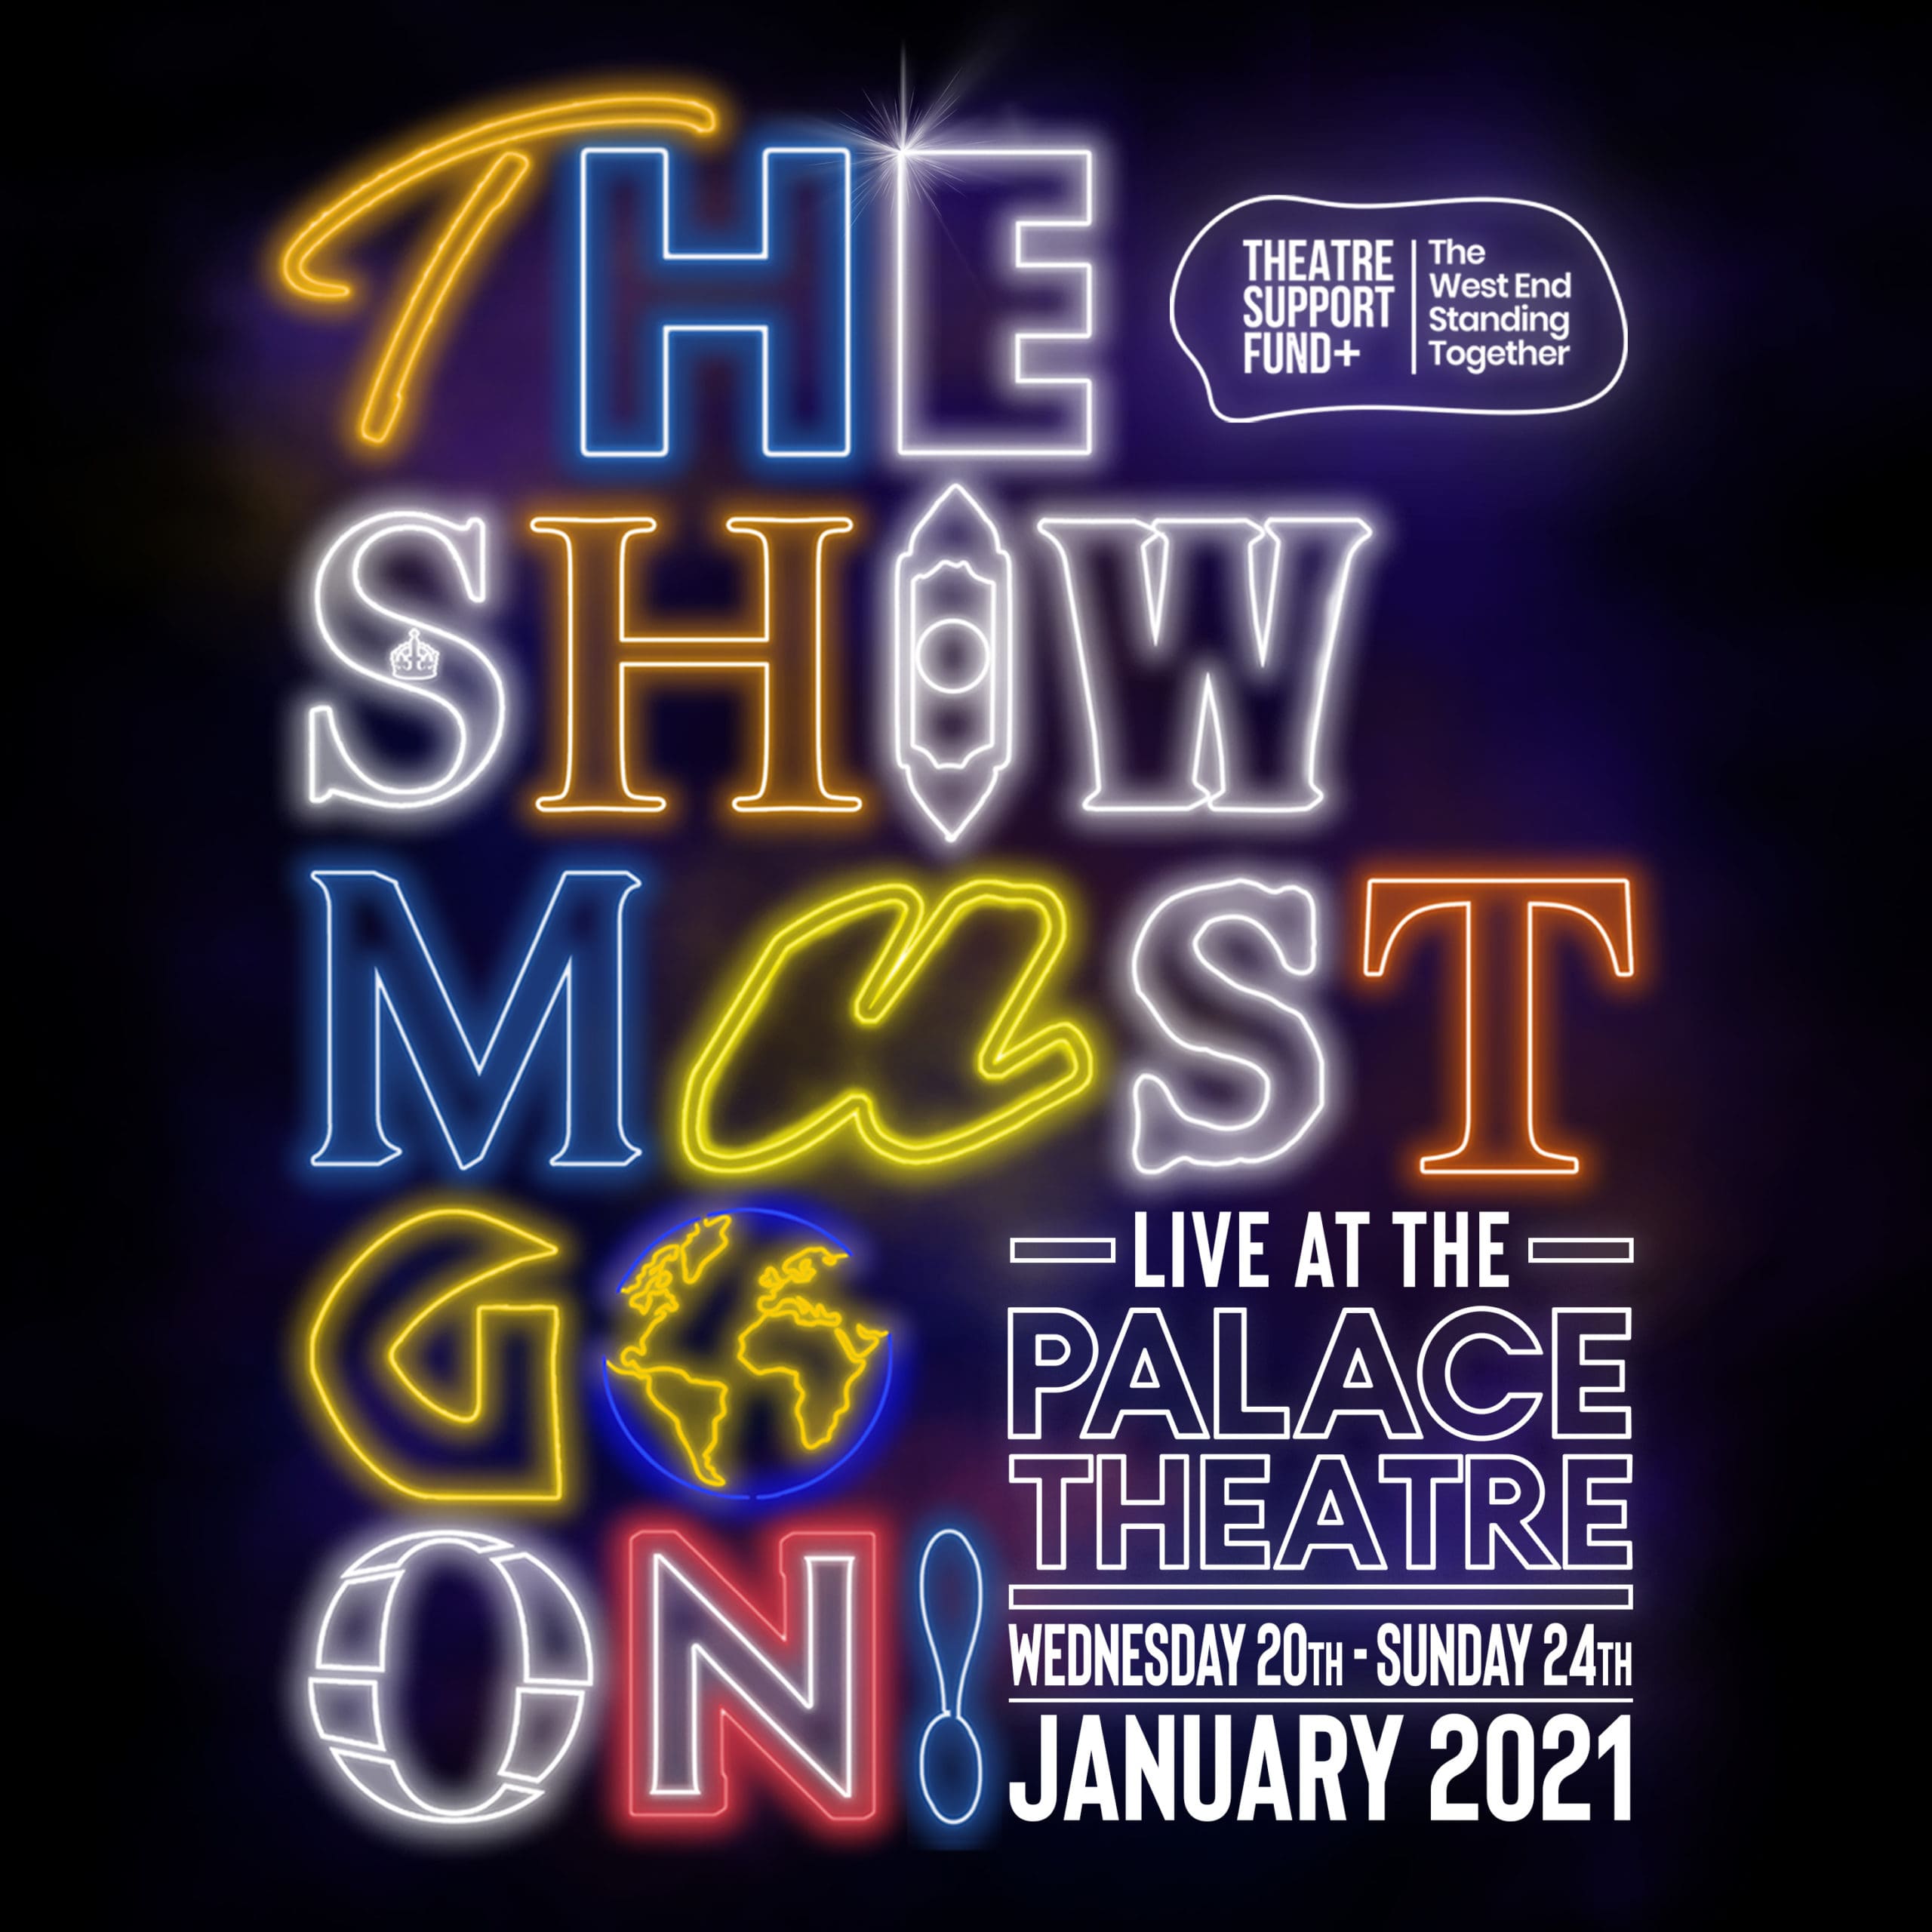 NEWS: The Show Must Go On!